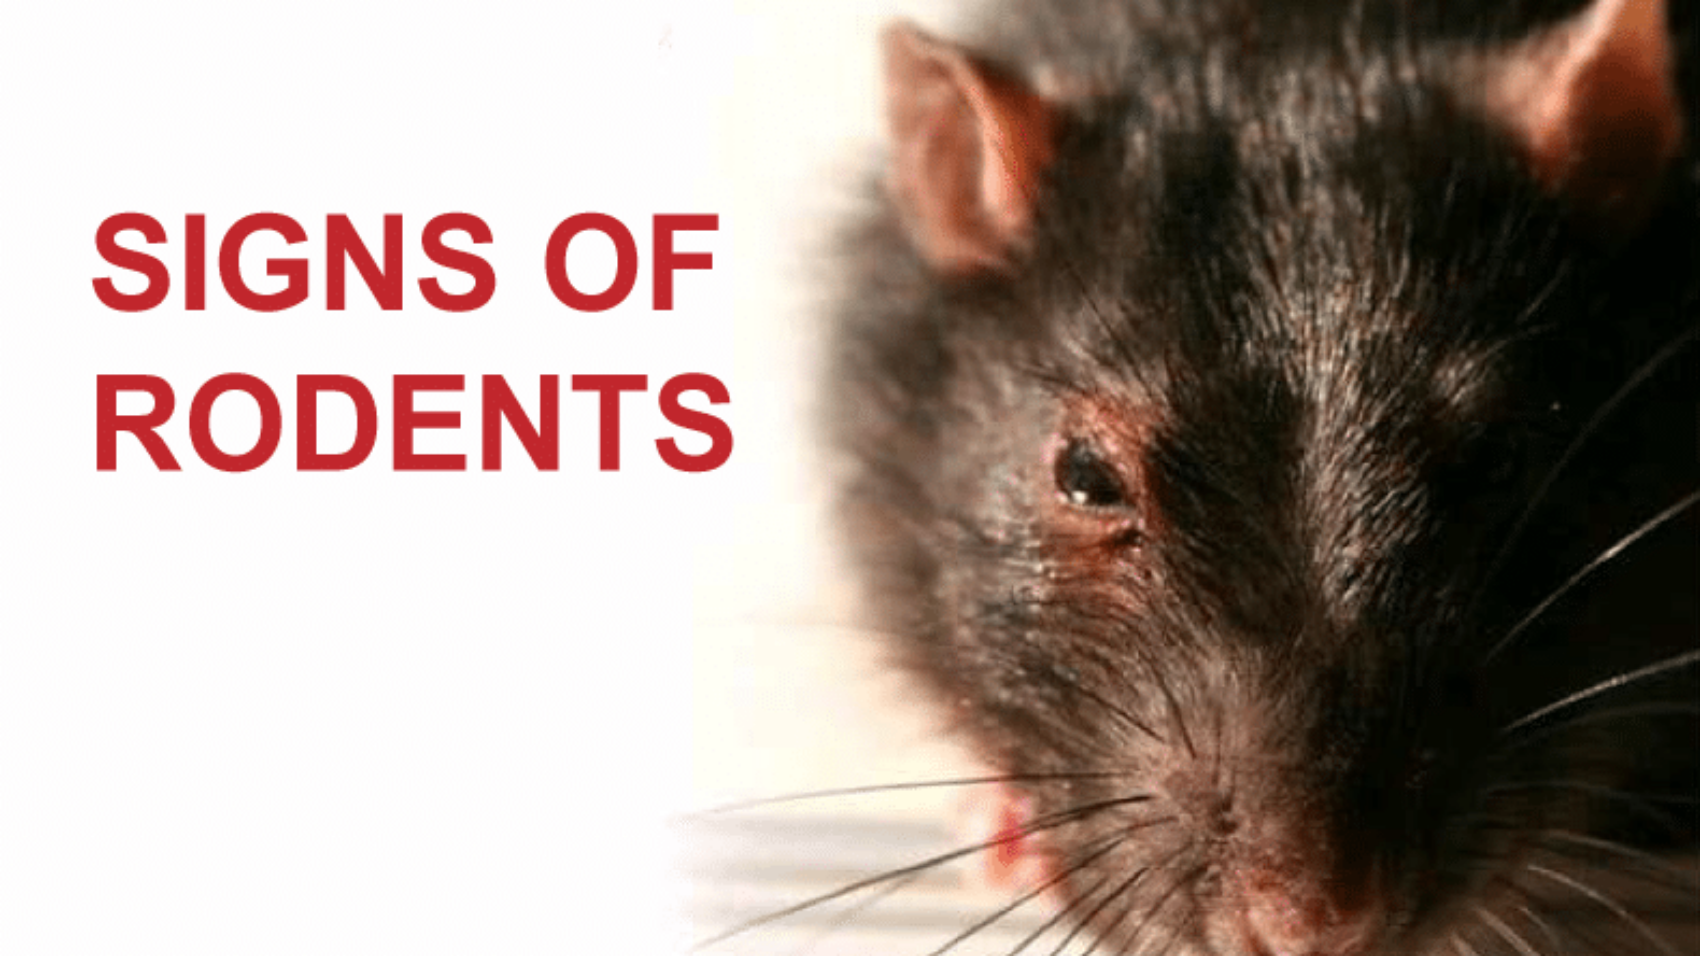 Signs-of-Rodents-790x470